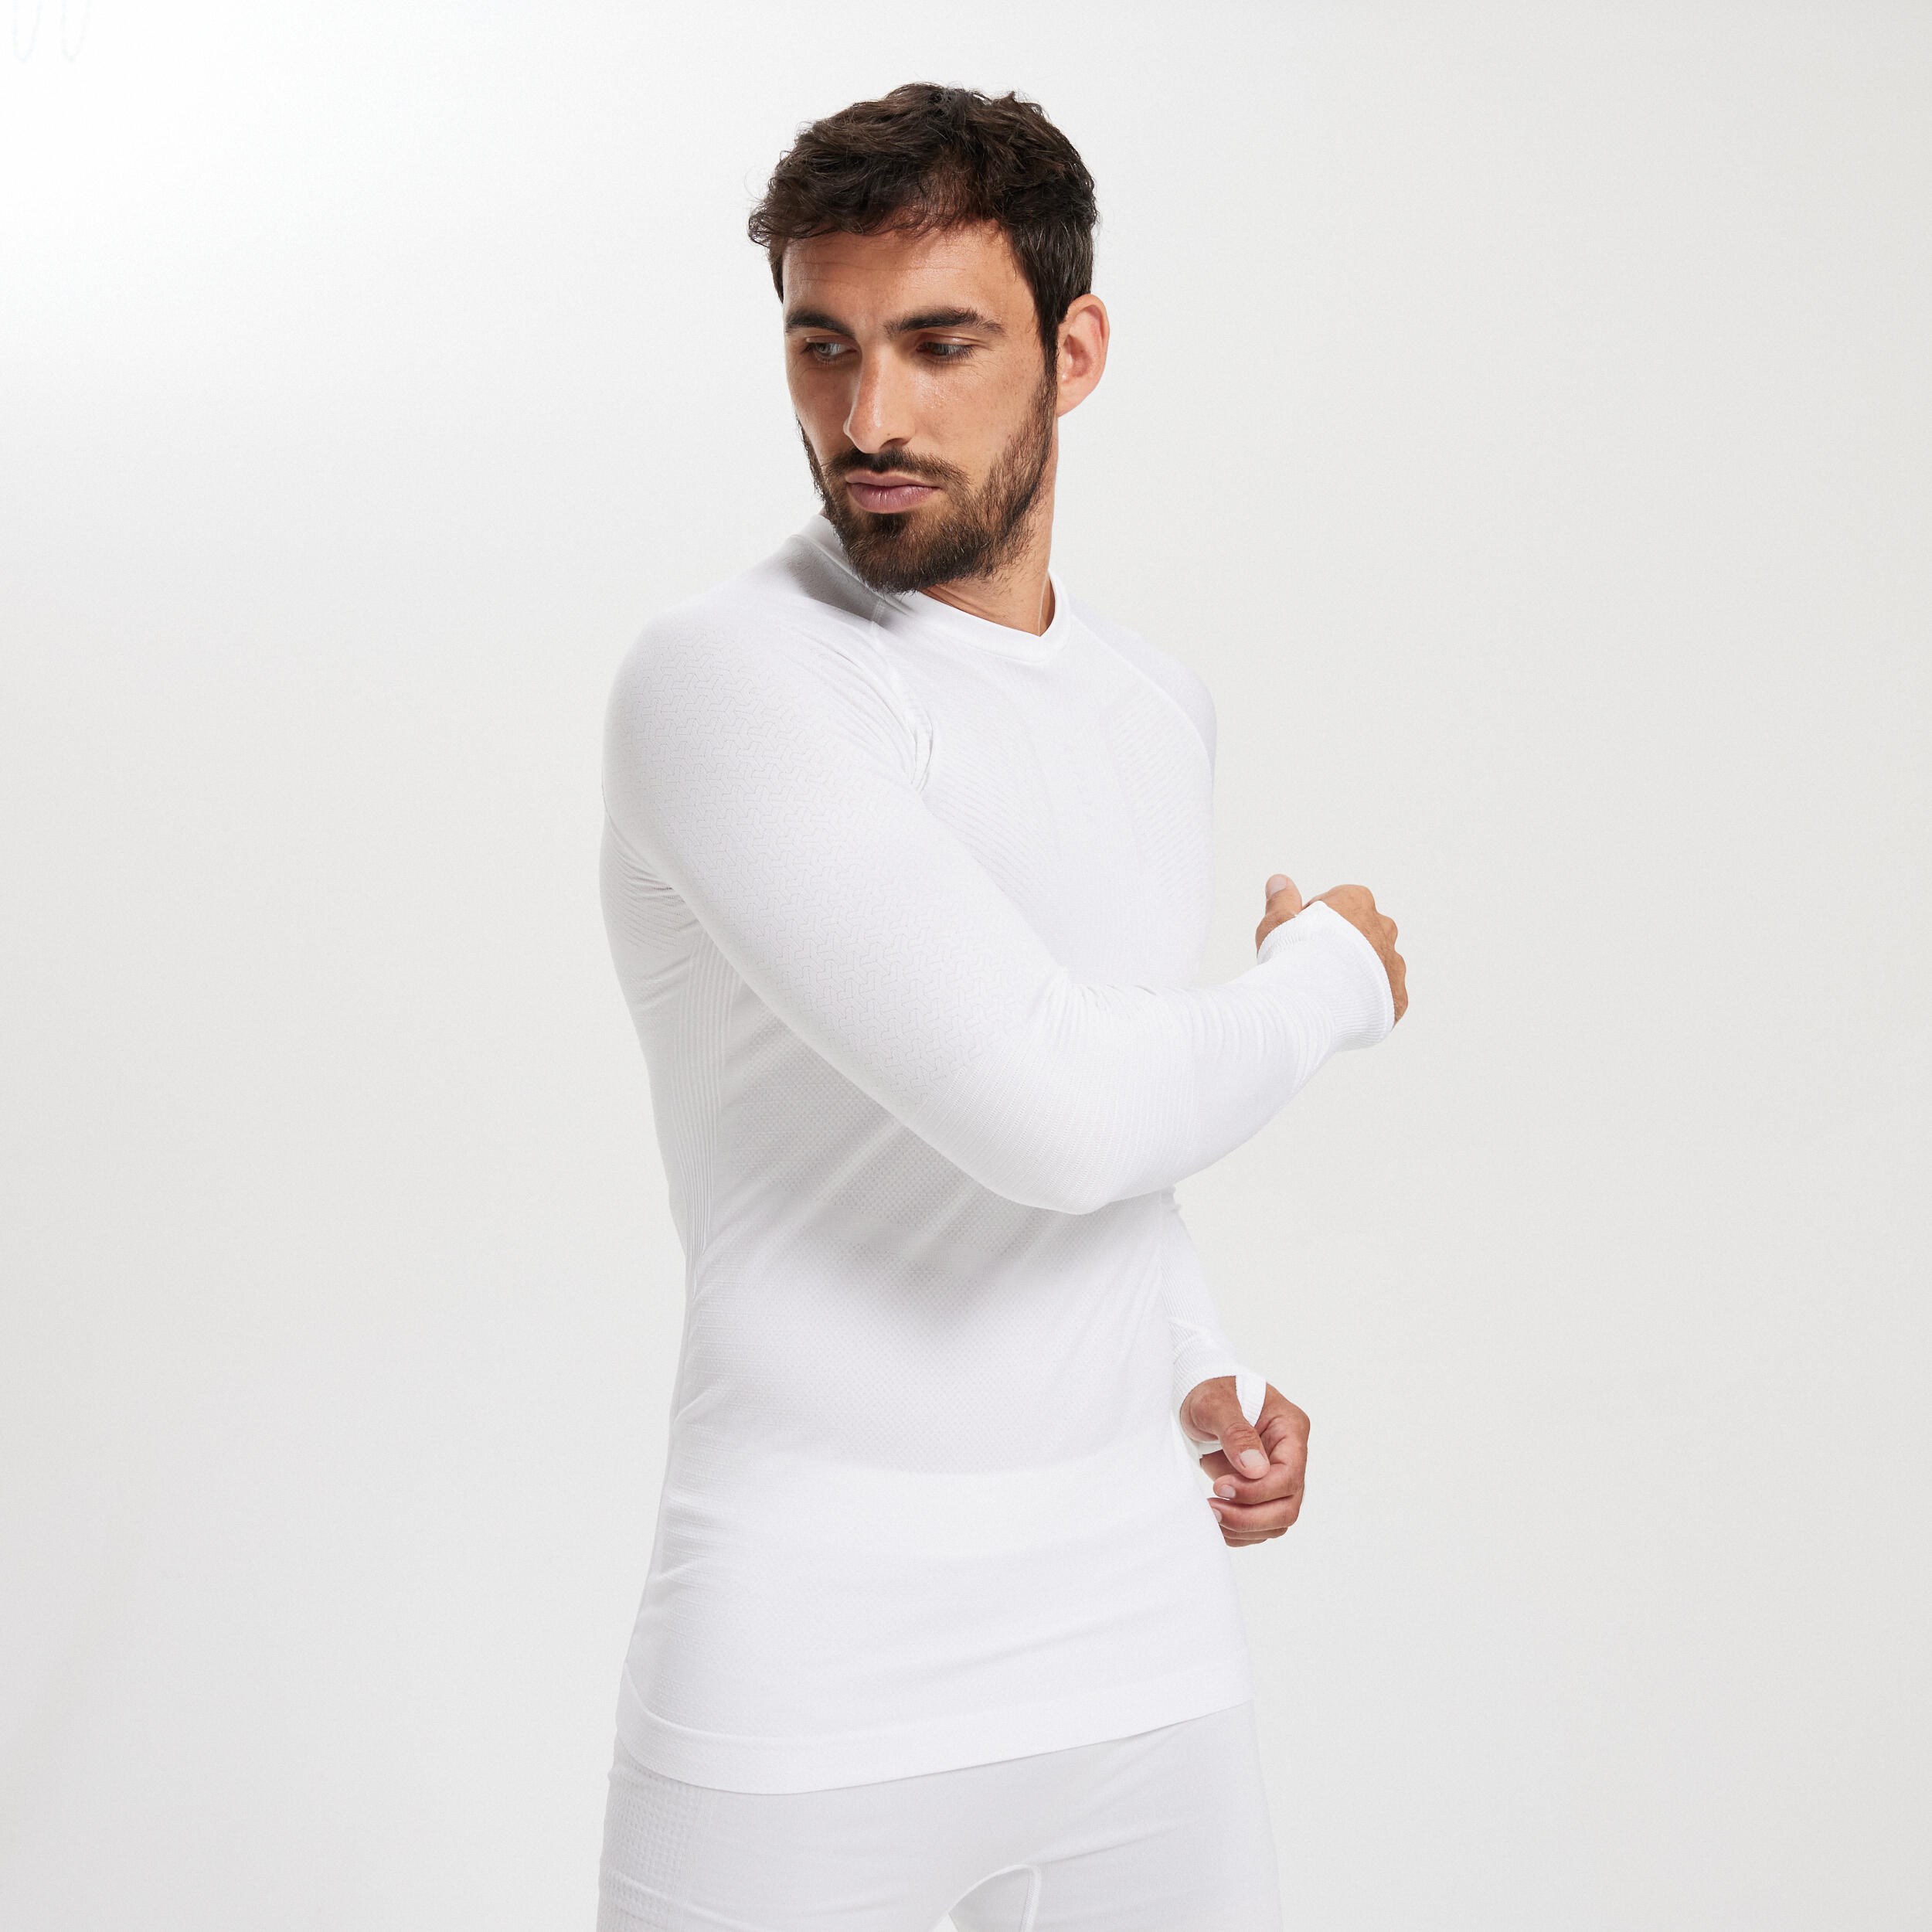 Adult Long-Sleeved Thermal Base Layer Top Keepdry 500 - White 9/13